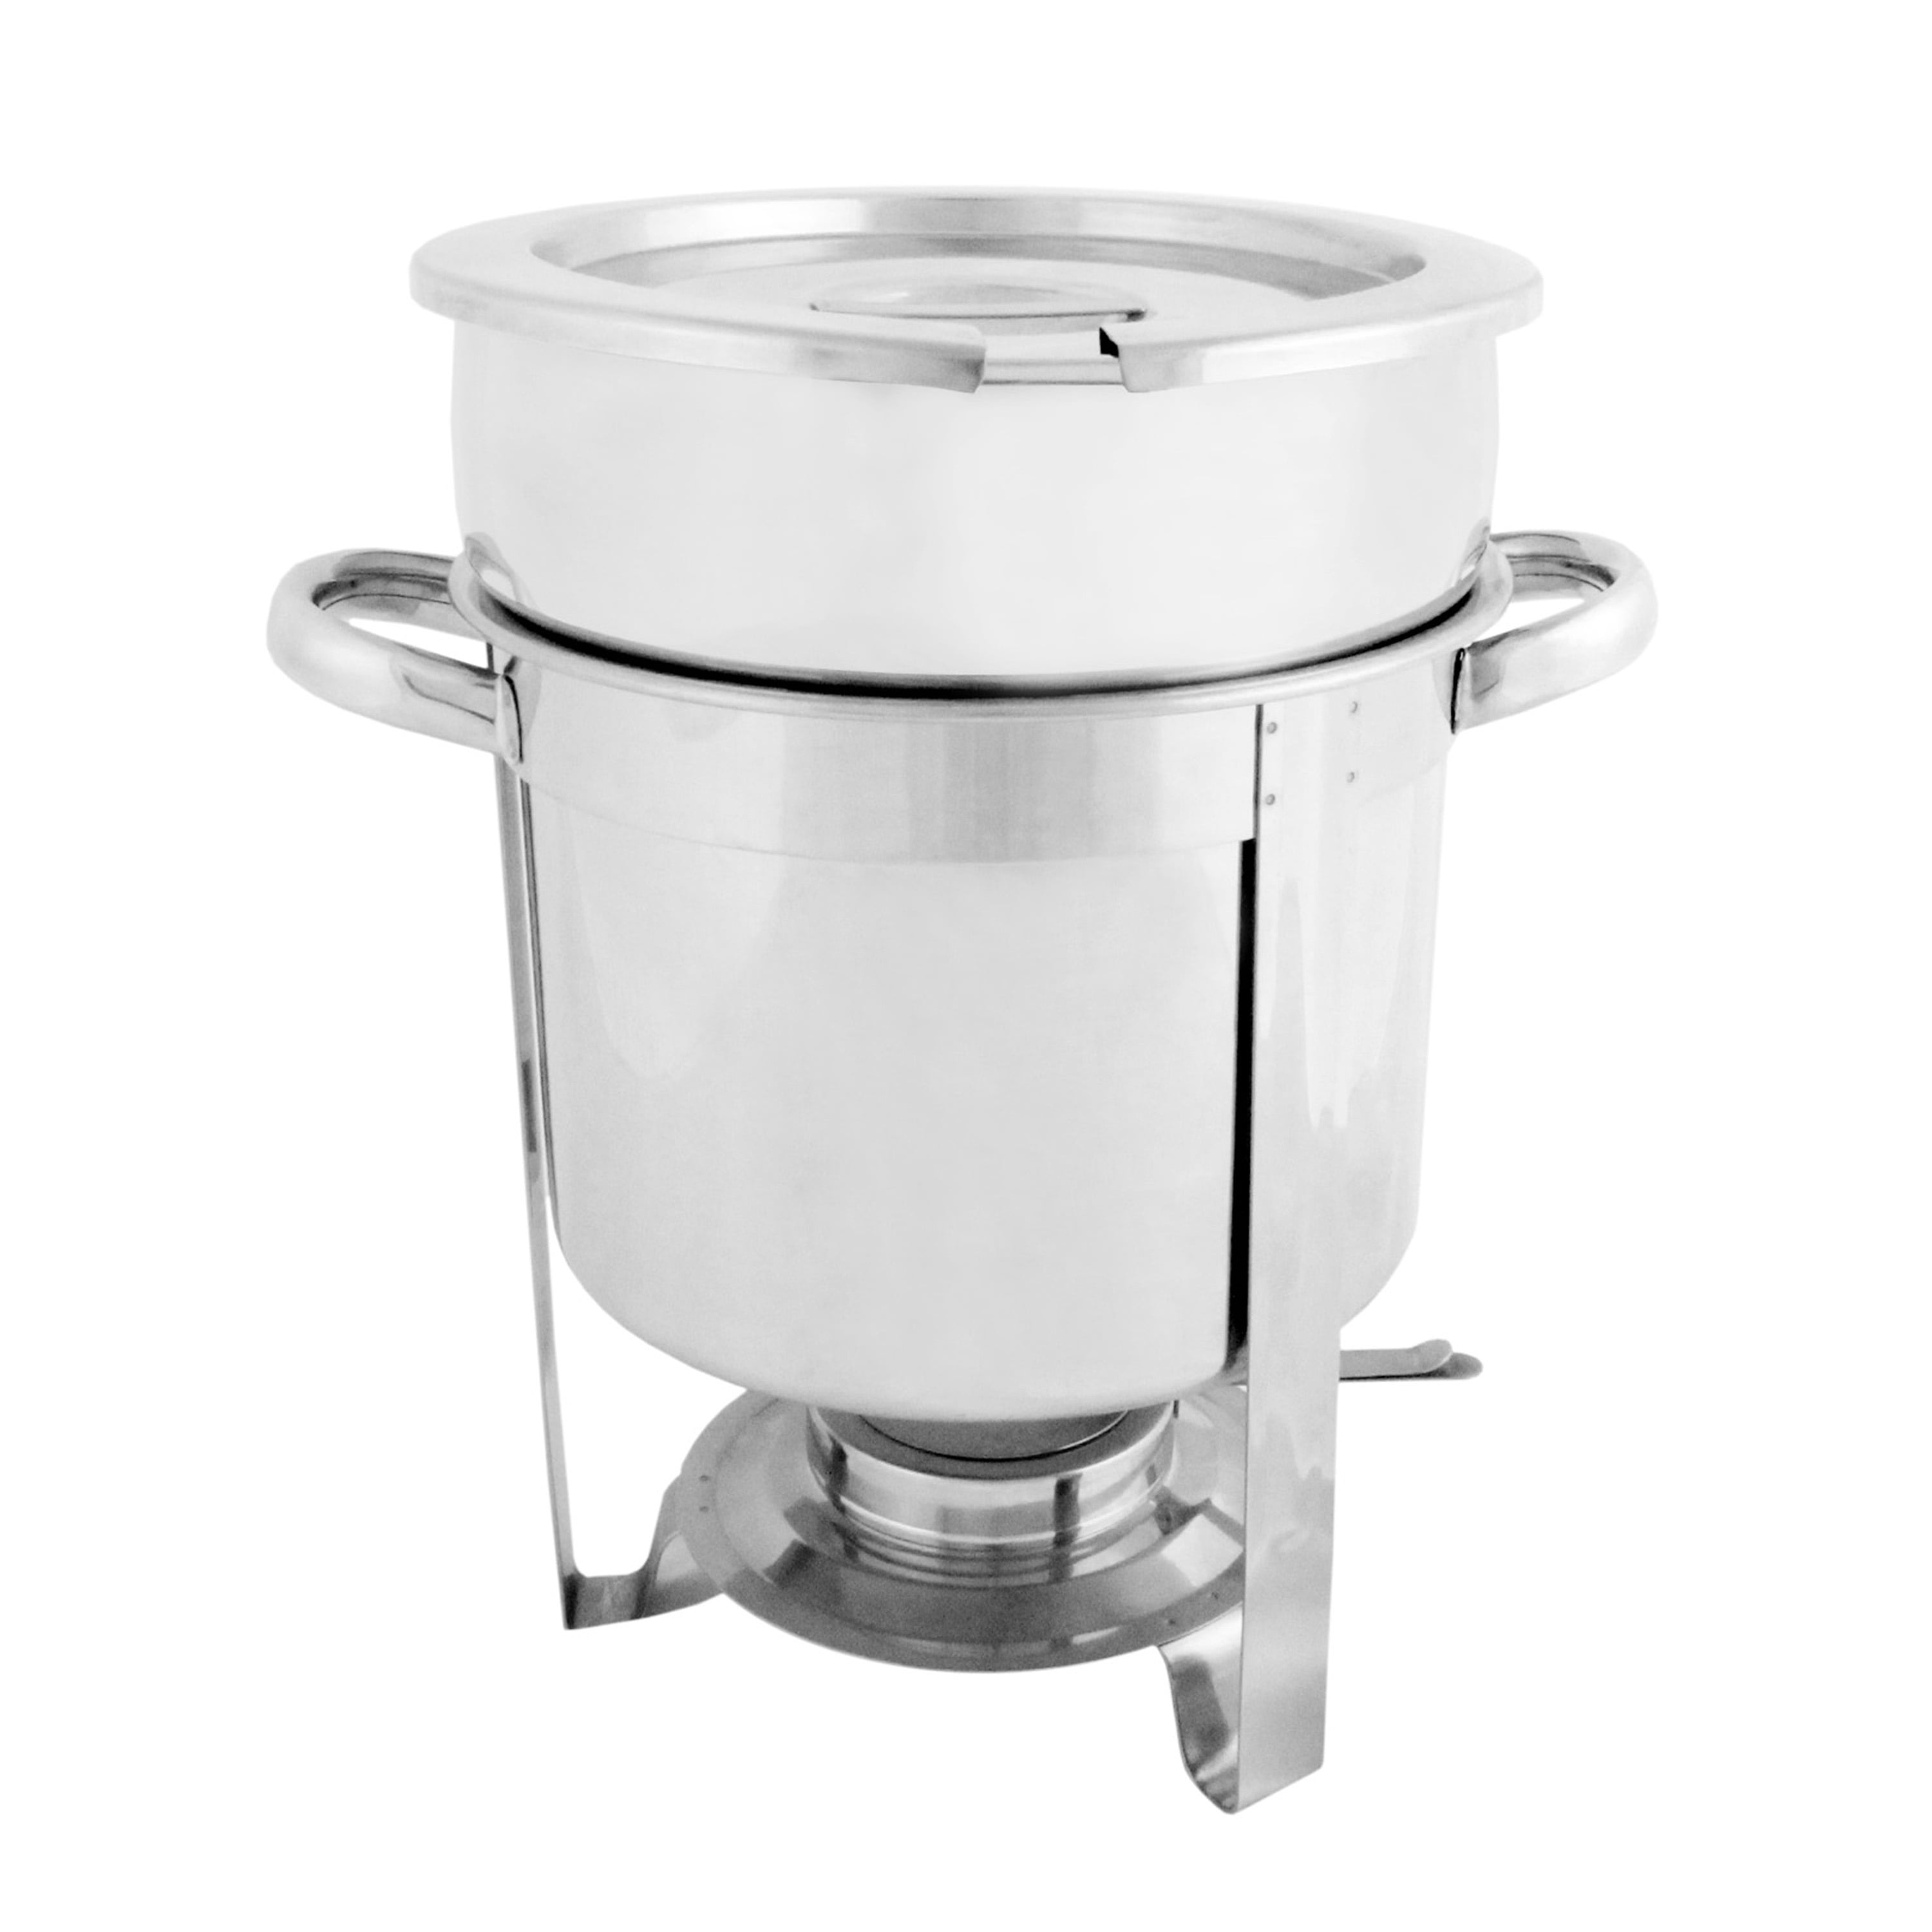 11-Quart Soup Warmer Stainless Steel Winco 211 